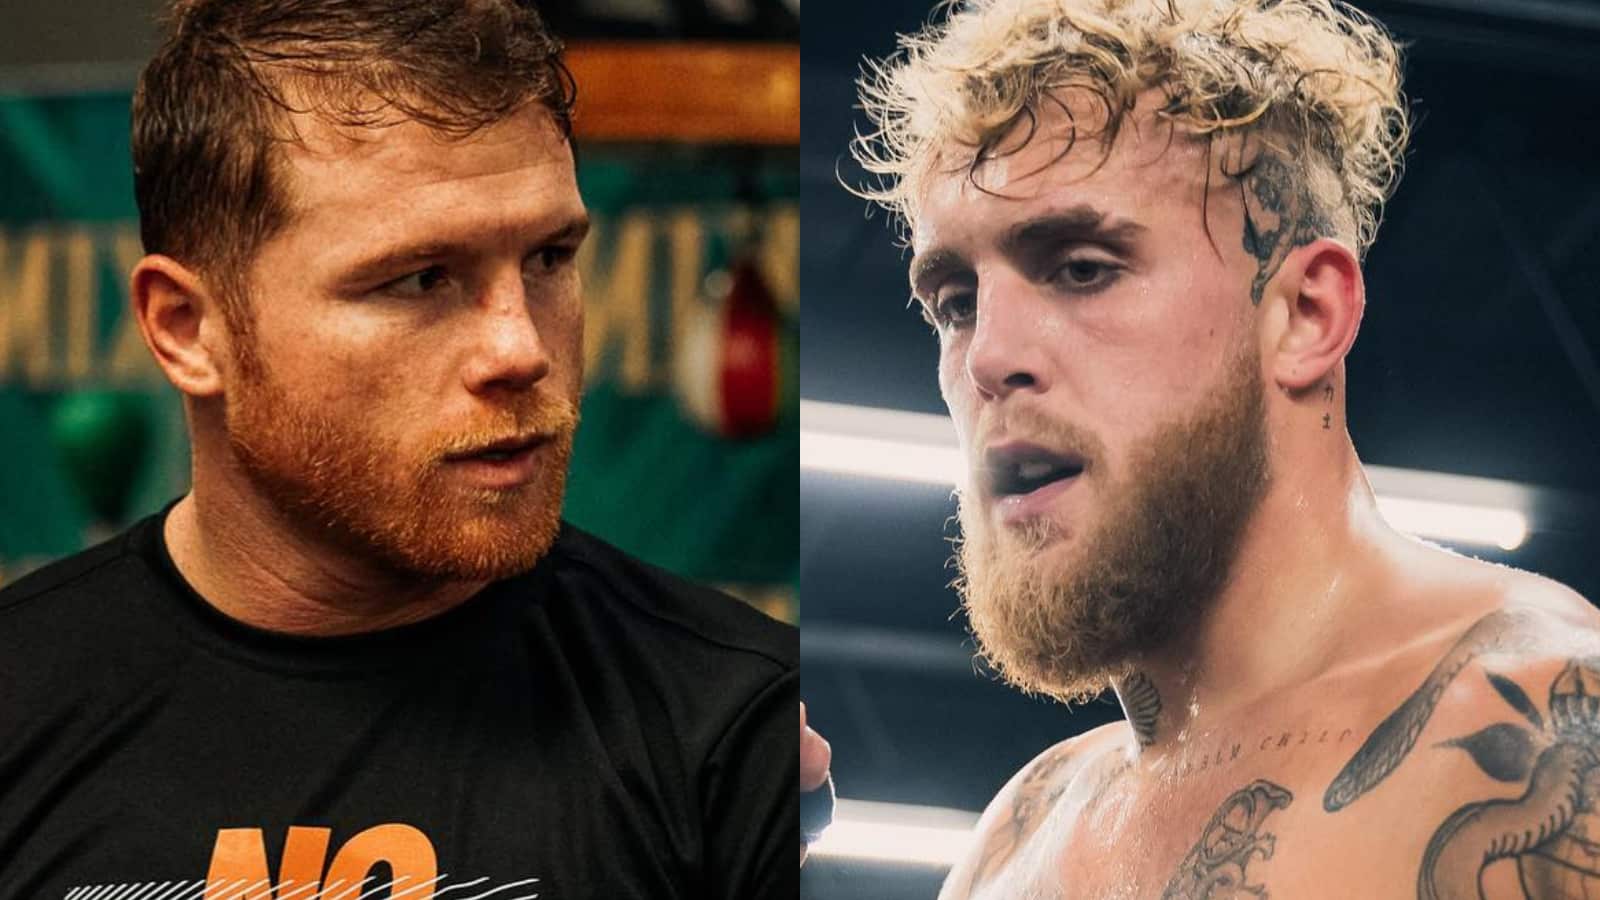 canelo open to fighting jake paul in boxing